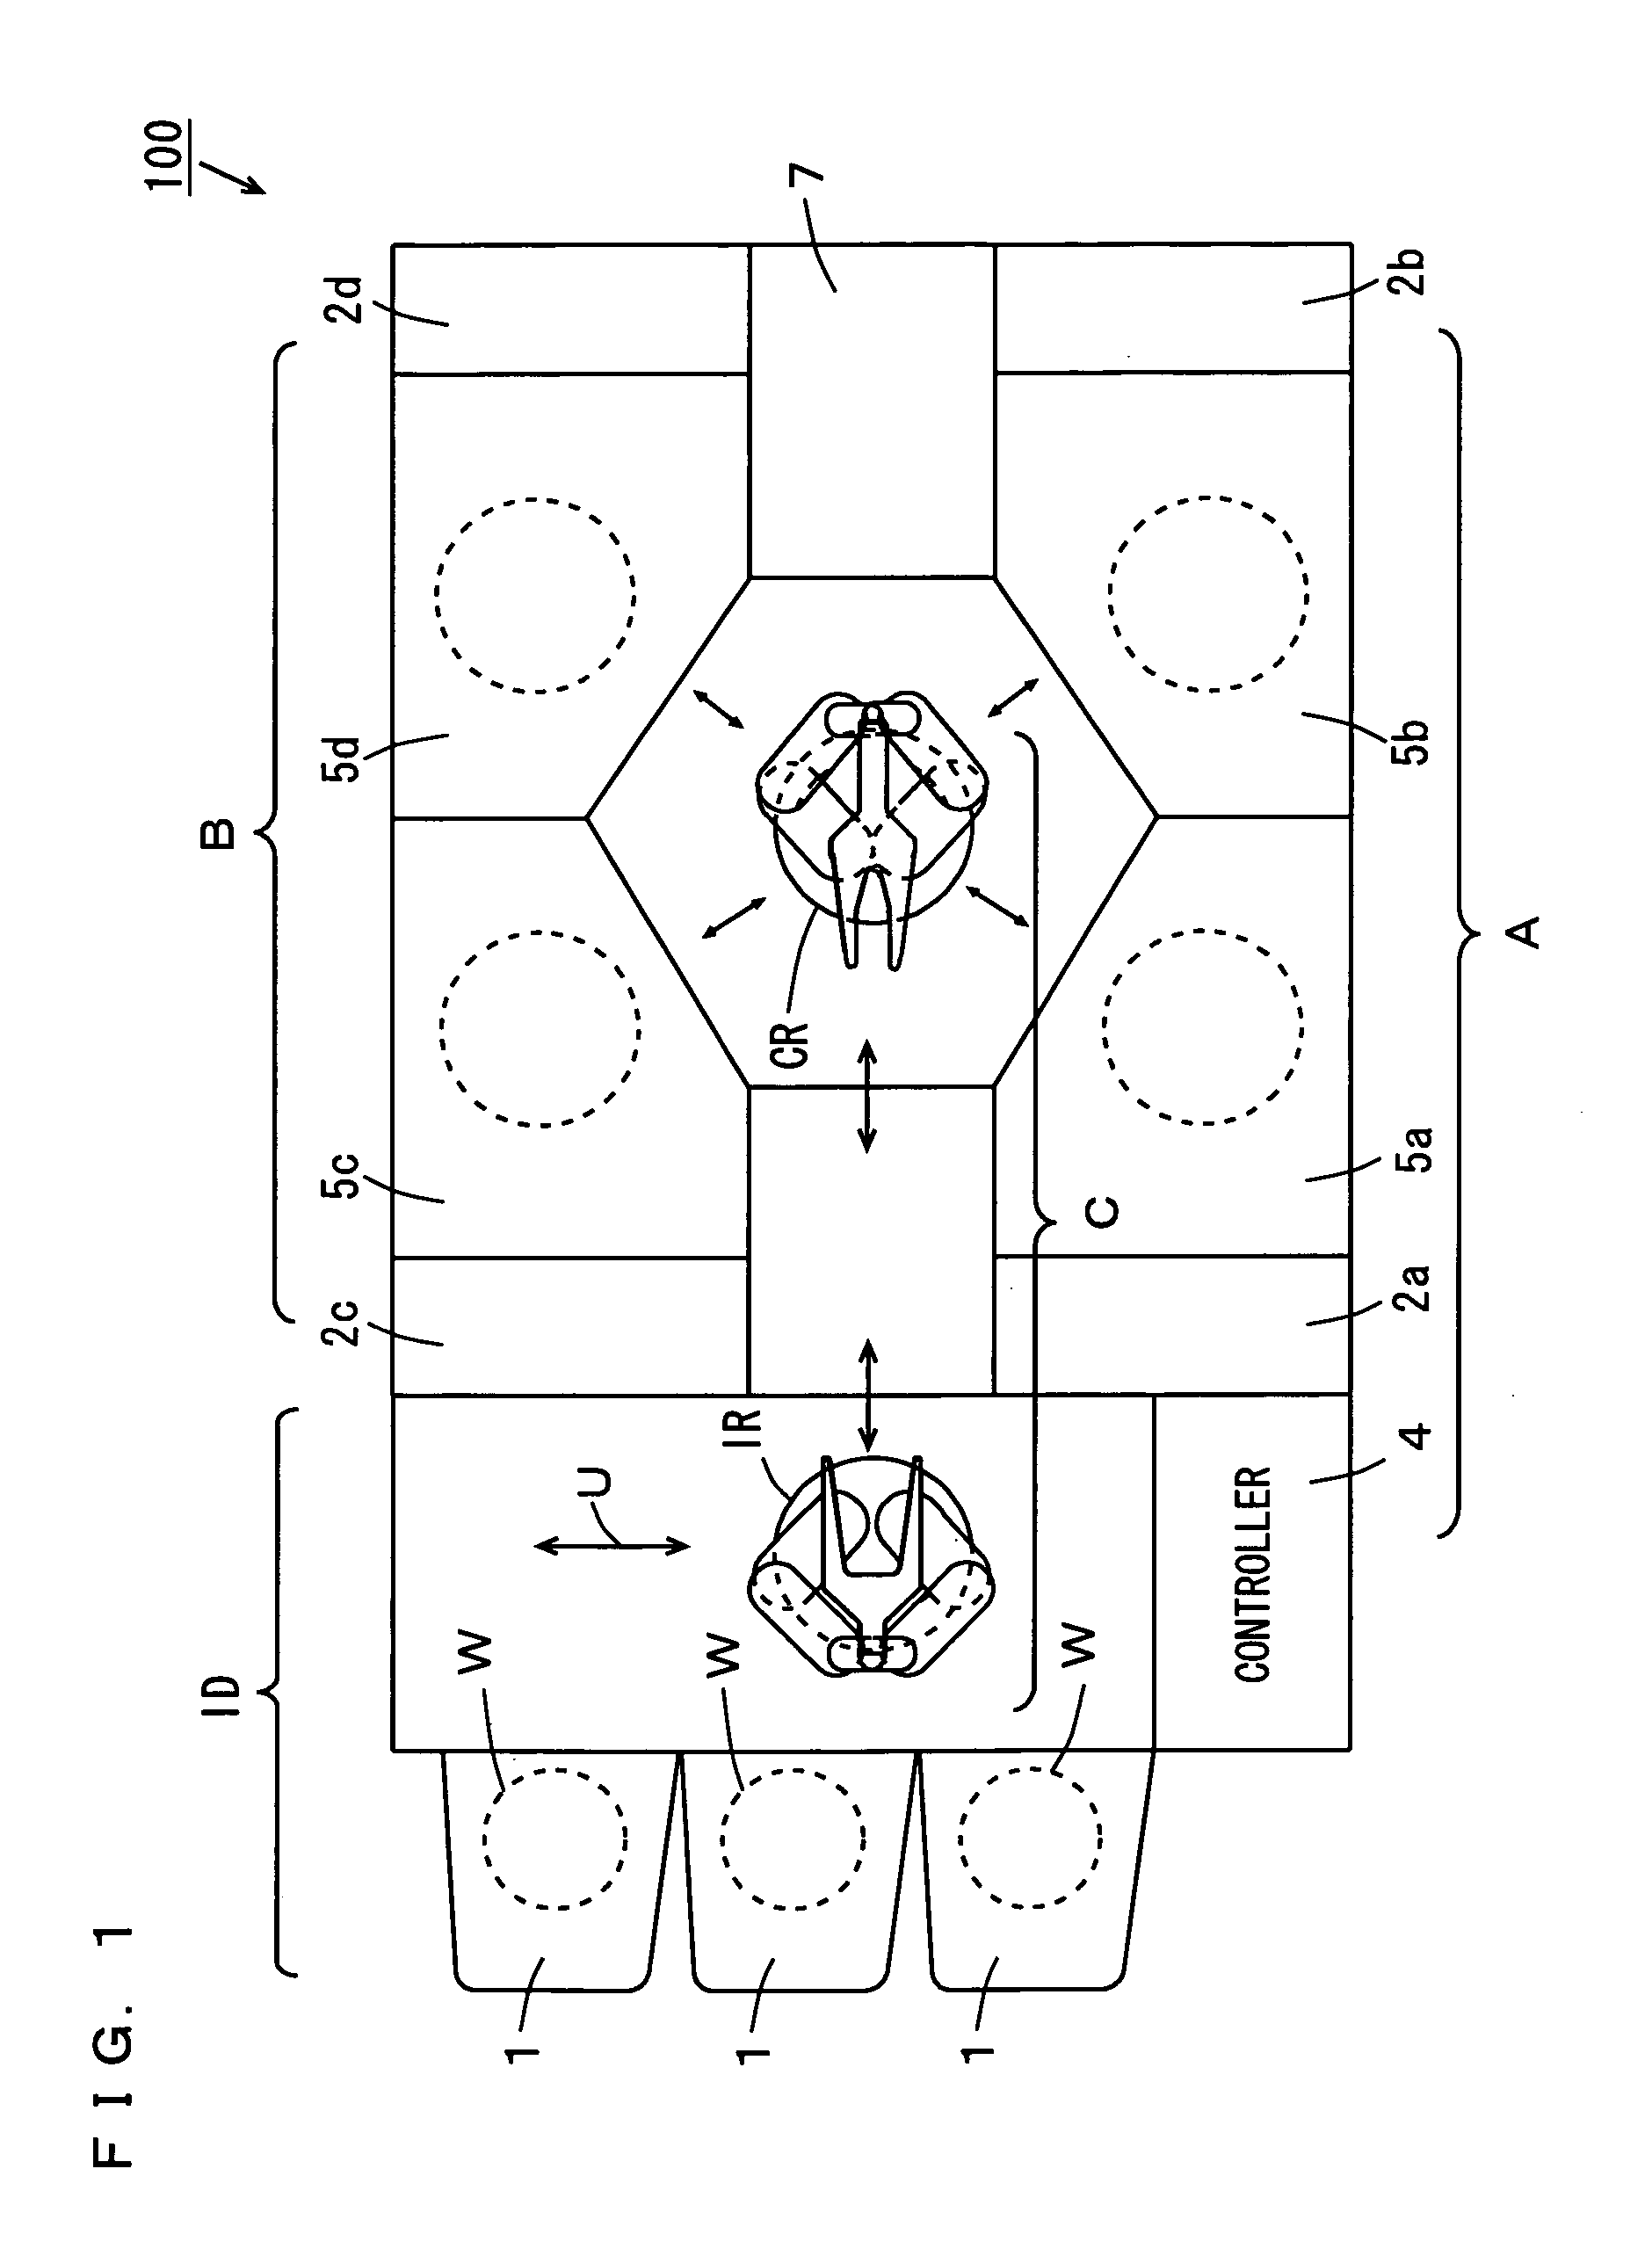 Substrate reversing device, substrate transporting device, substrate processing device, substrate reversing method, substrate transporting method and substrate processing method